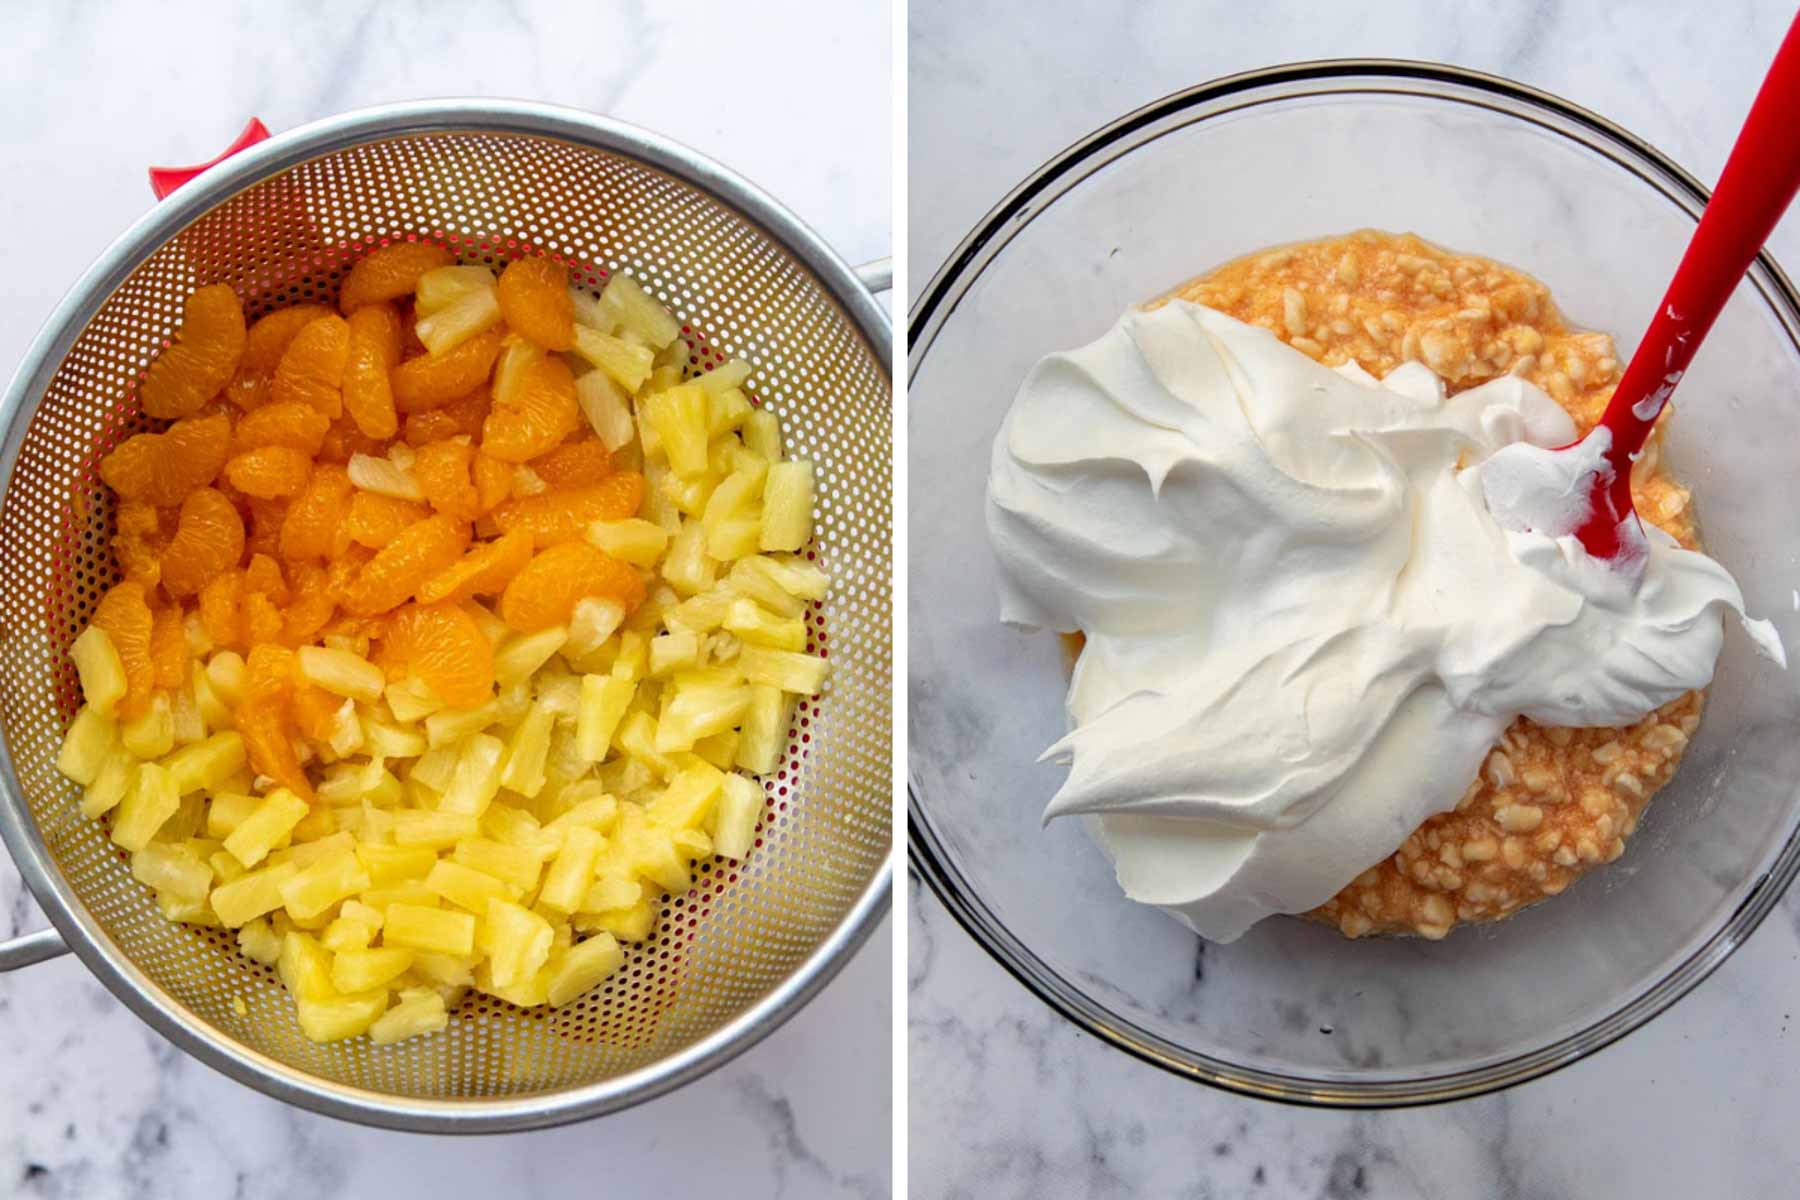 images showing the fruit draining in a colander and the fluff ingredients being mixed.